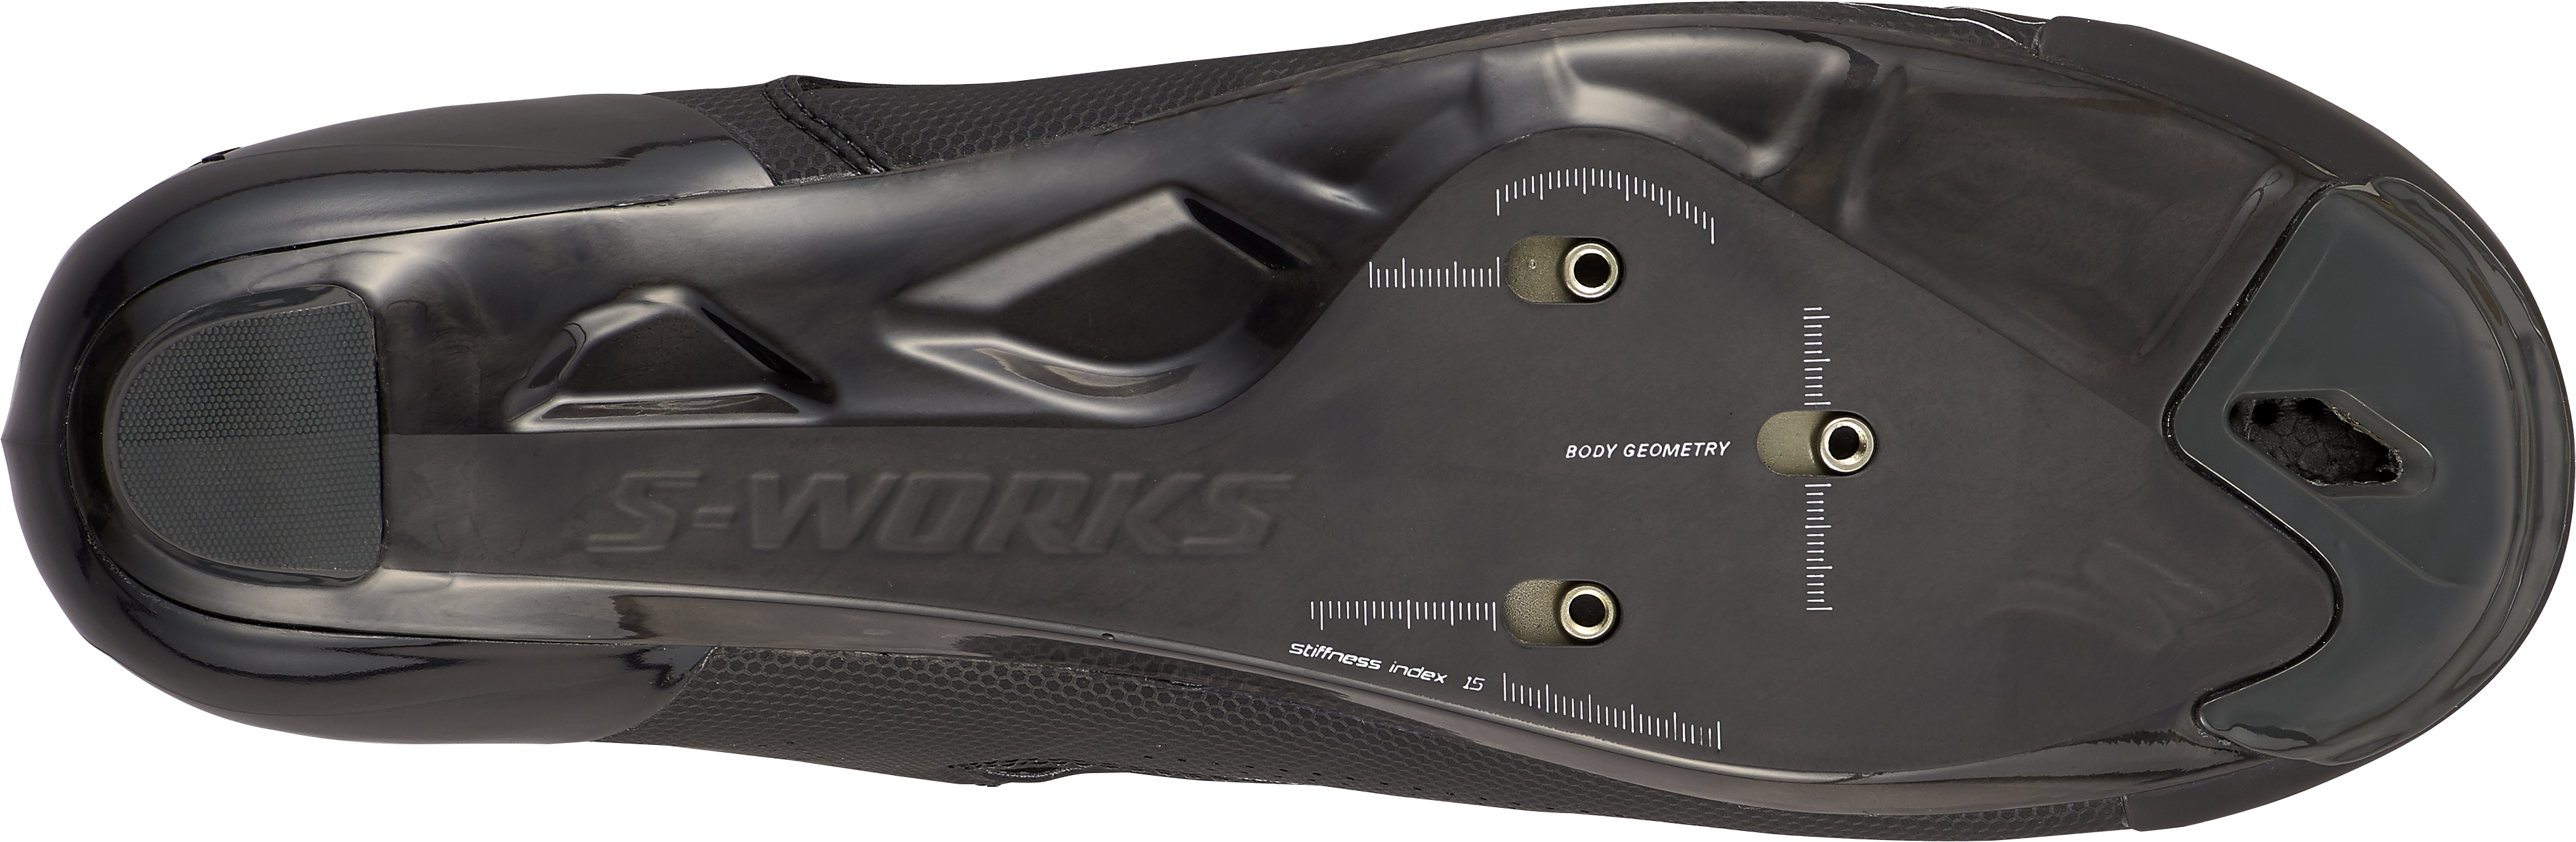 S-WORKS ARES ROAD SHOES BLK 42(42 (27cm) ブラック): シューズ 